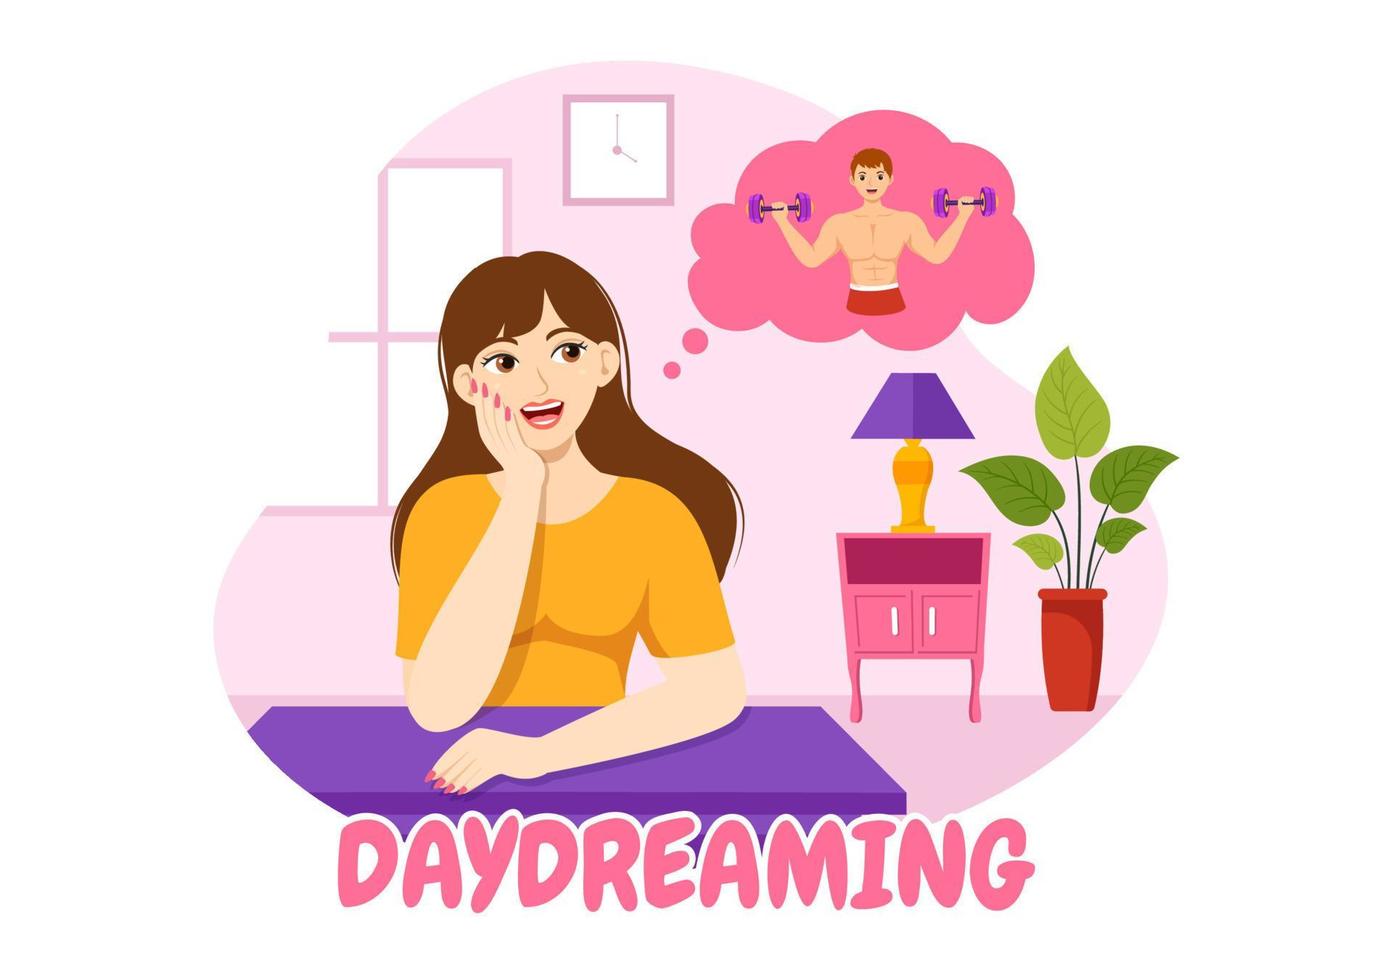 People Daydreaming Illustration with Imagining and Fantasizing in Bubble for Landing Page or Poster Templates in Flat Cartoon Hand Drawn vector